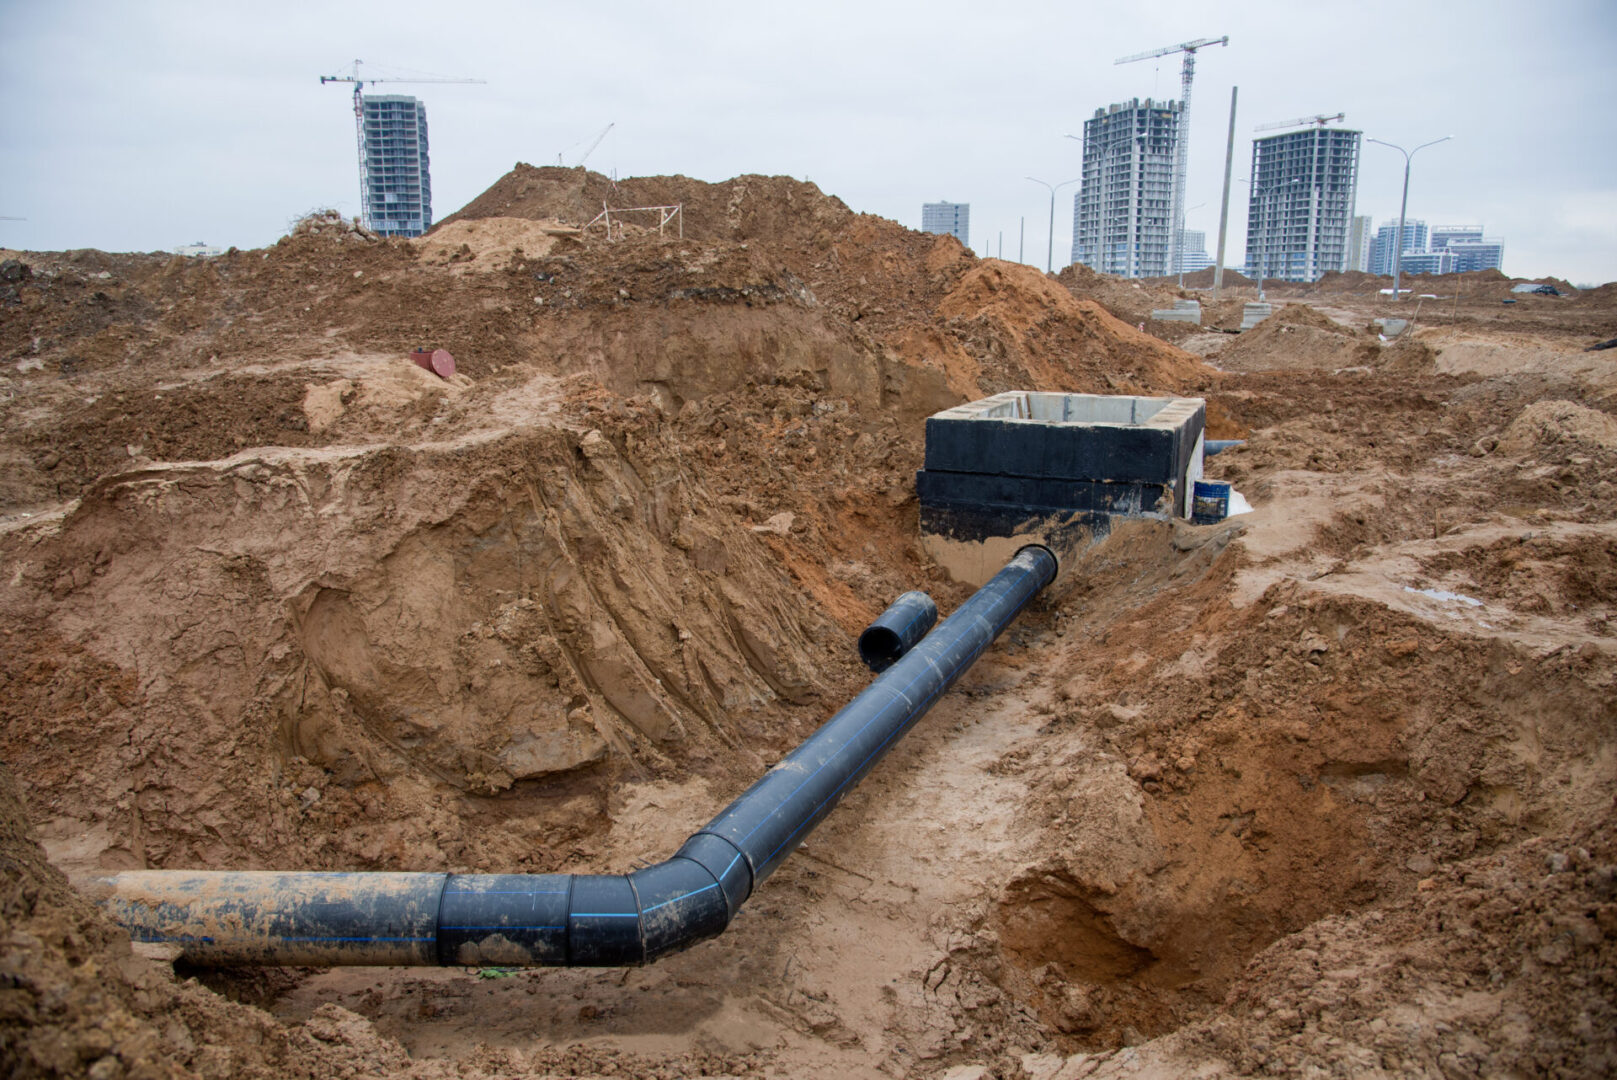 A large pipe is in the dirt near some buildings.